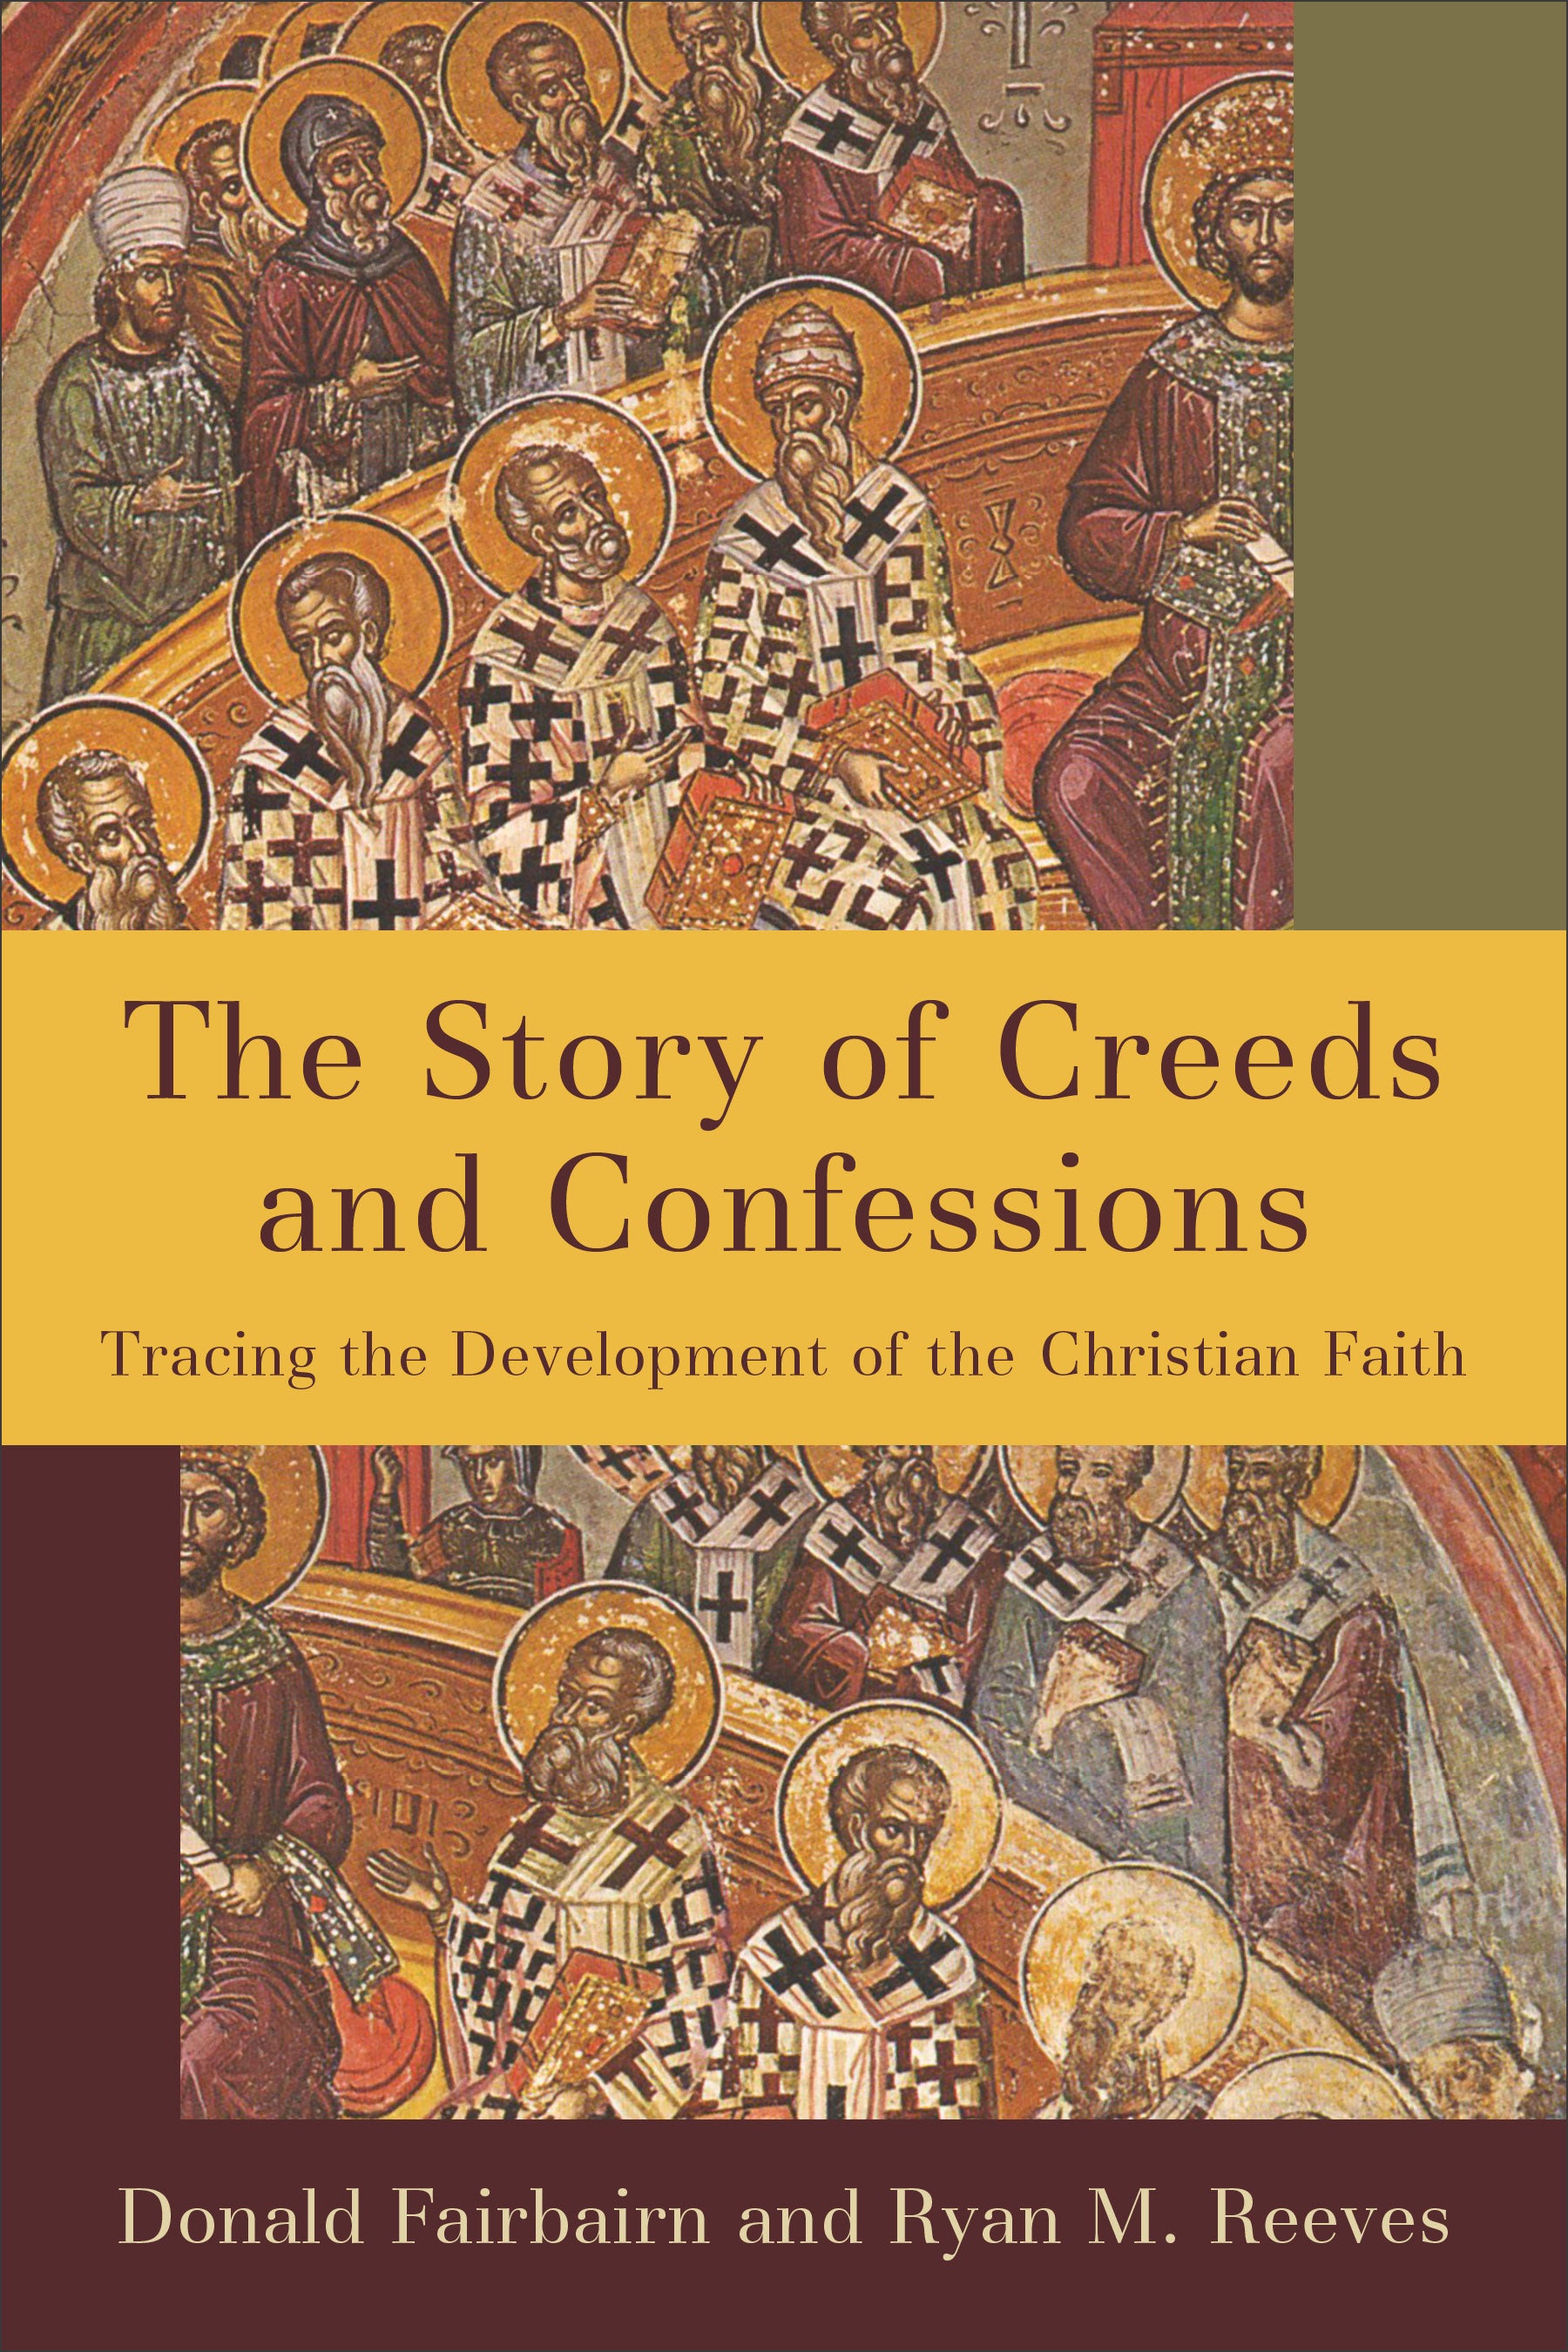 Image of The Story of Creeds and Confessions other